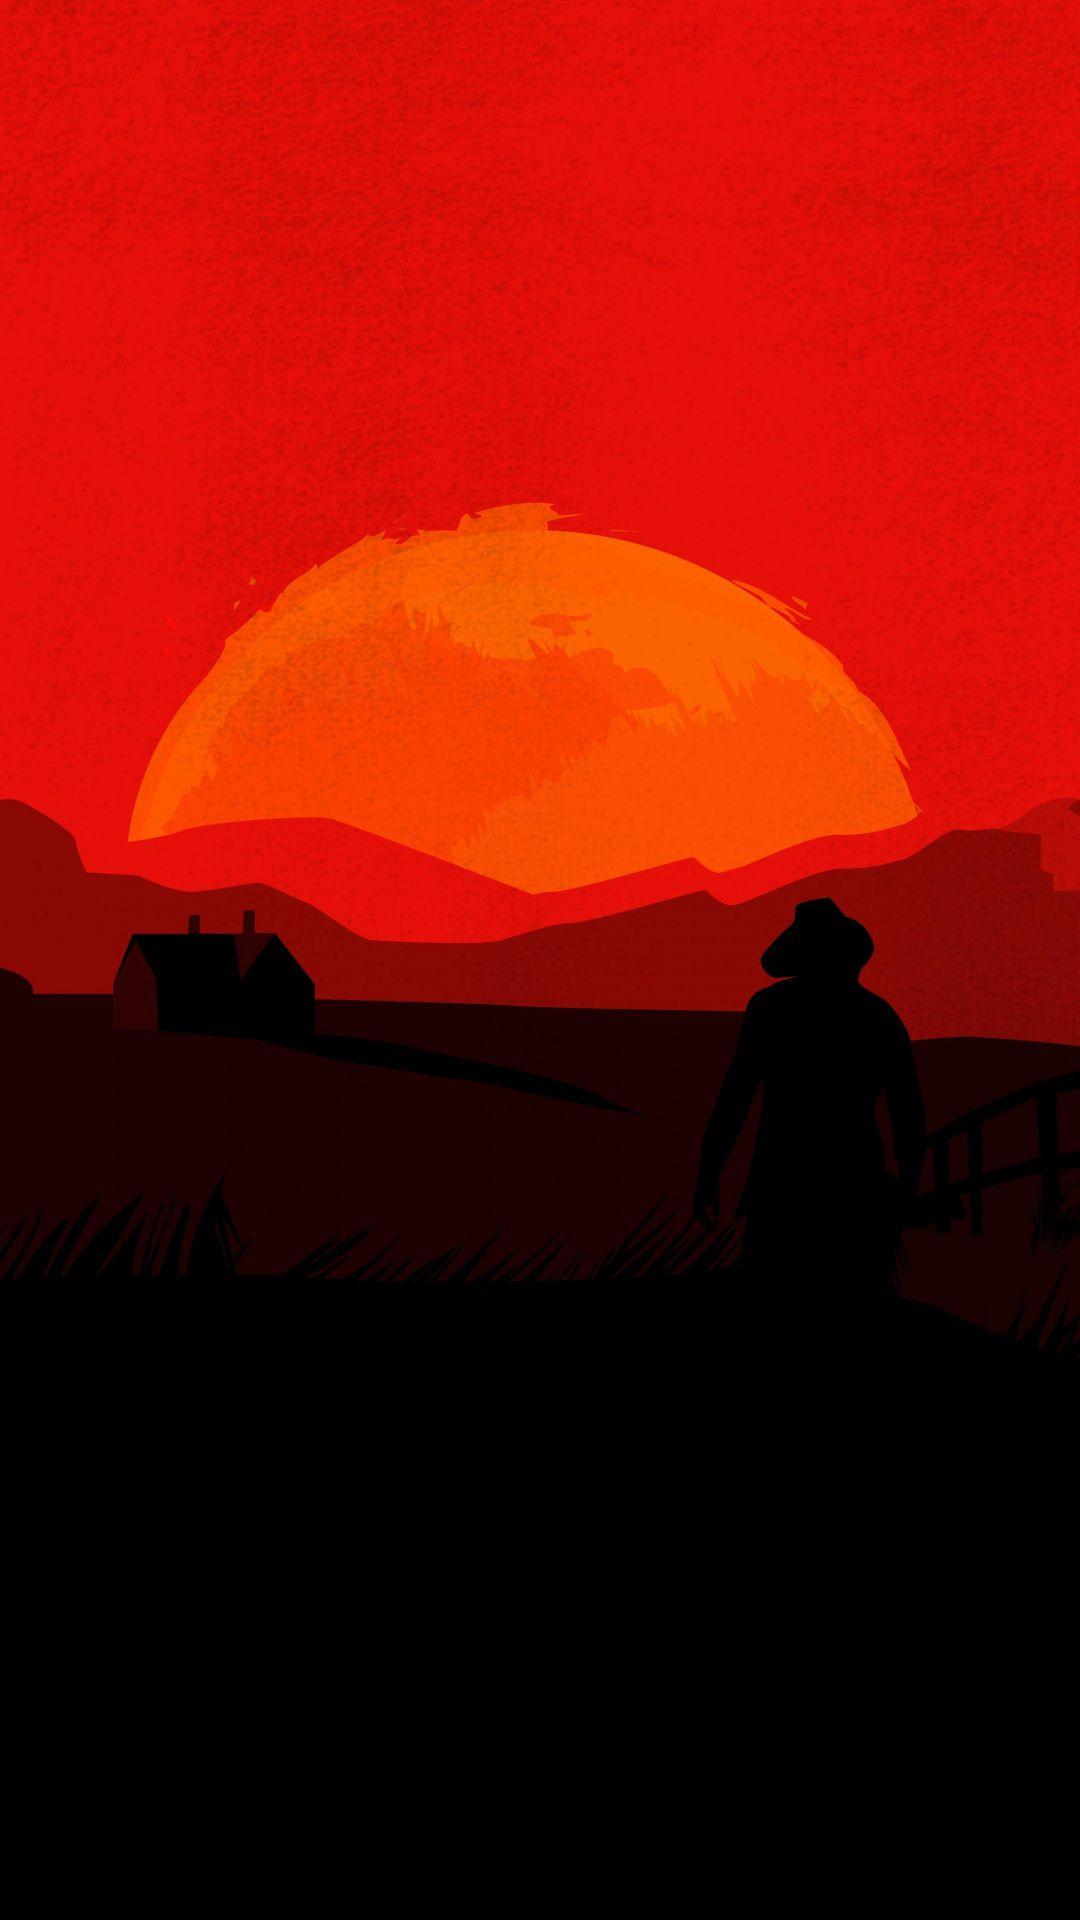 Download 1080x1920 Wallpaper Red Dead Redemption Red Dead Redemption, Red, Afterglow, Sunset. Red dead redemption, Red dead redemption ii, Digital art beginner